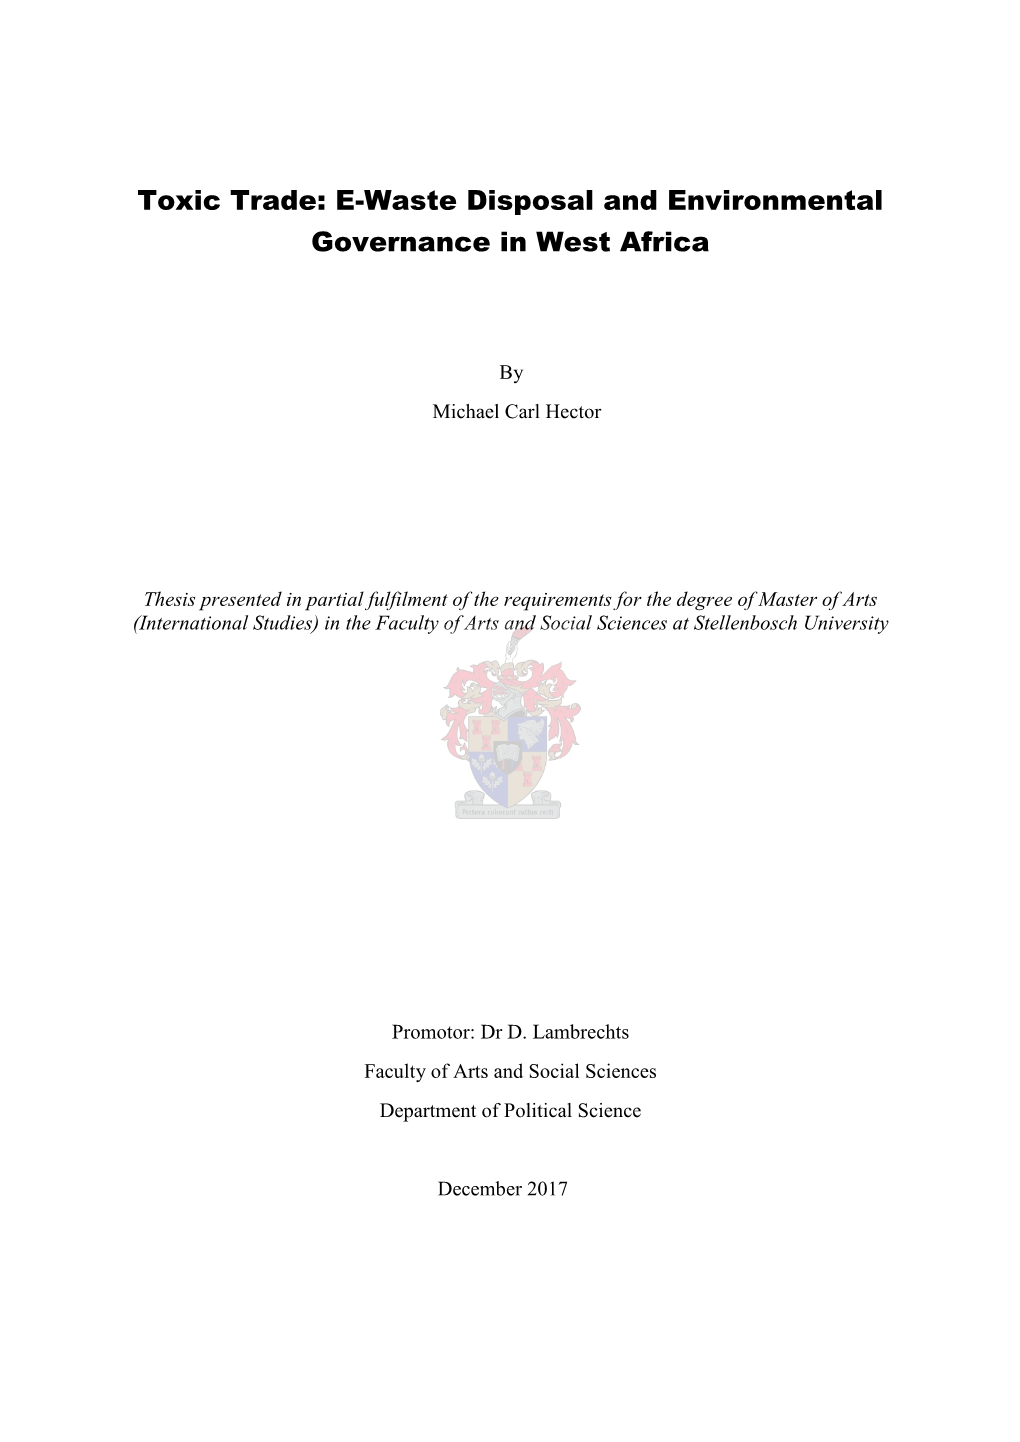 E-Waste Disposal and Environmental Governance in West Africa